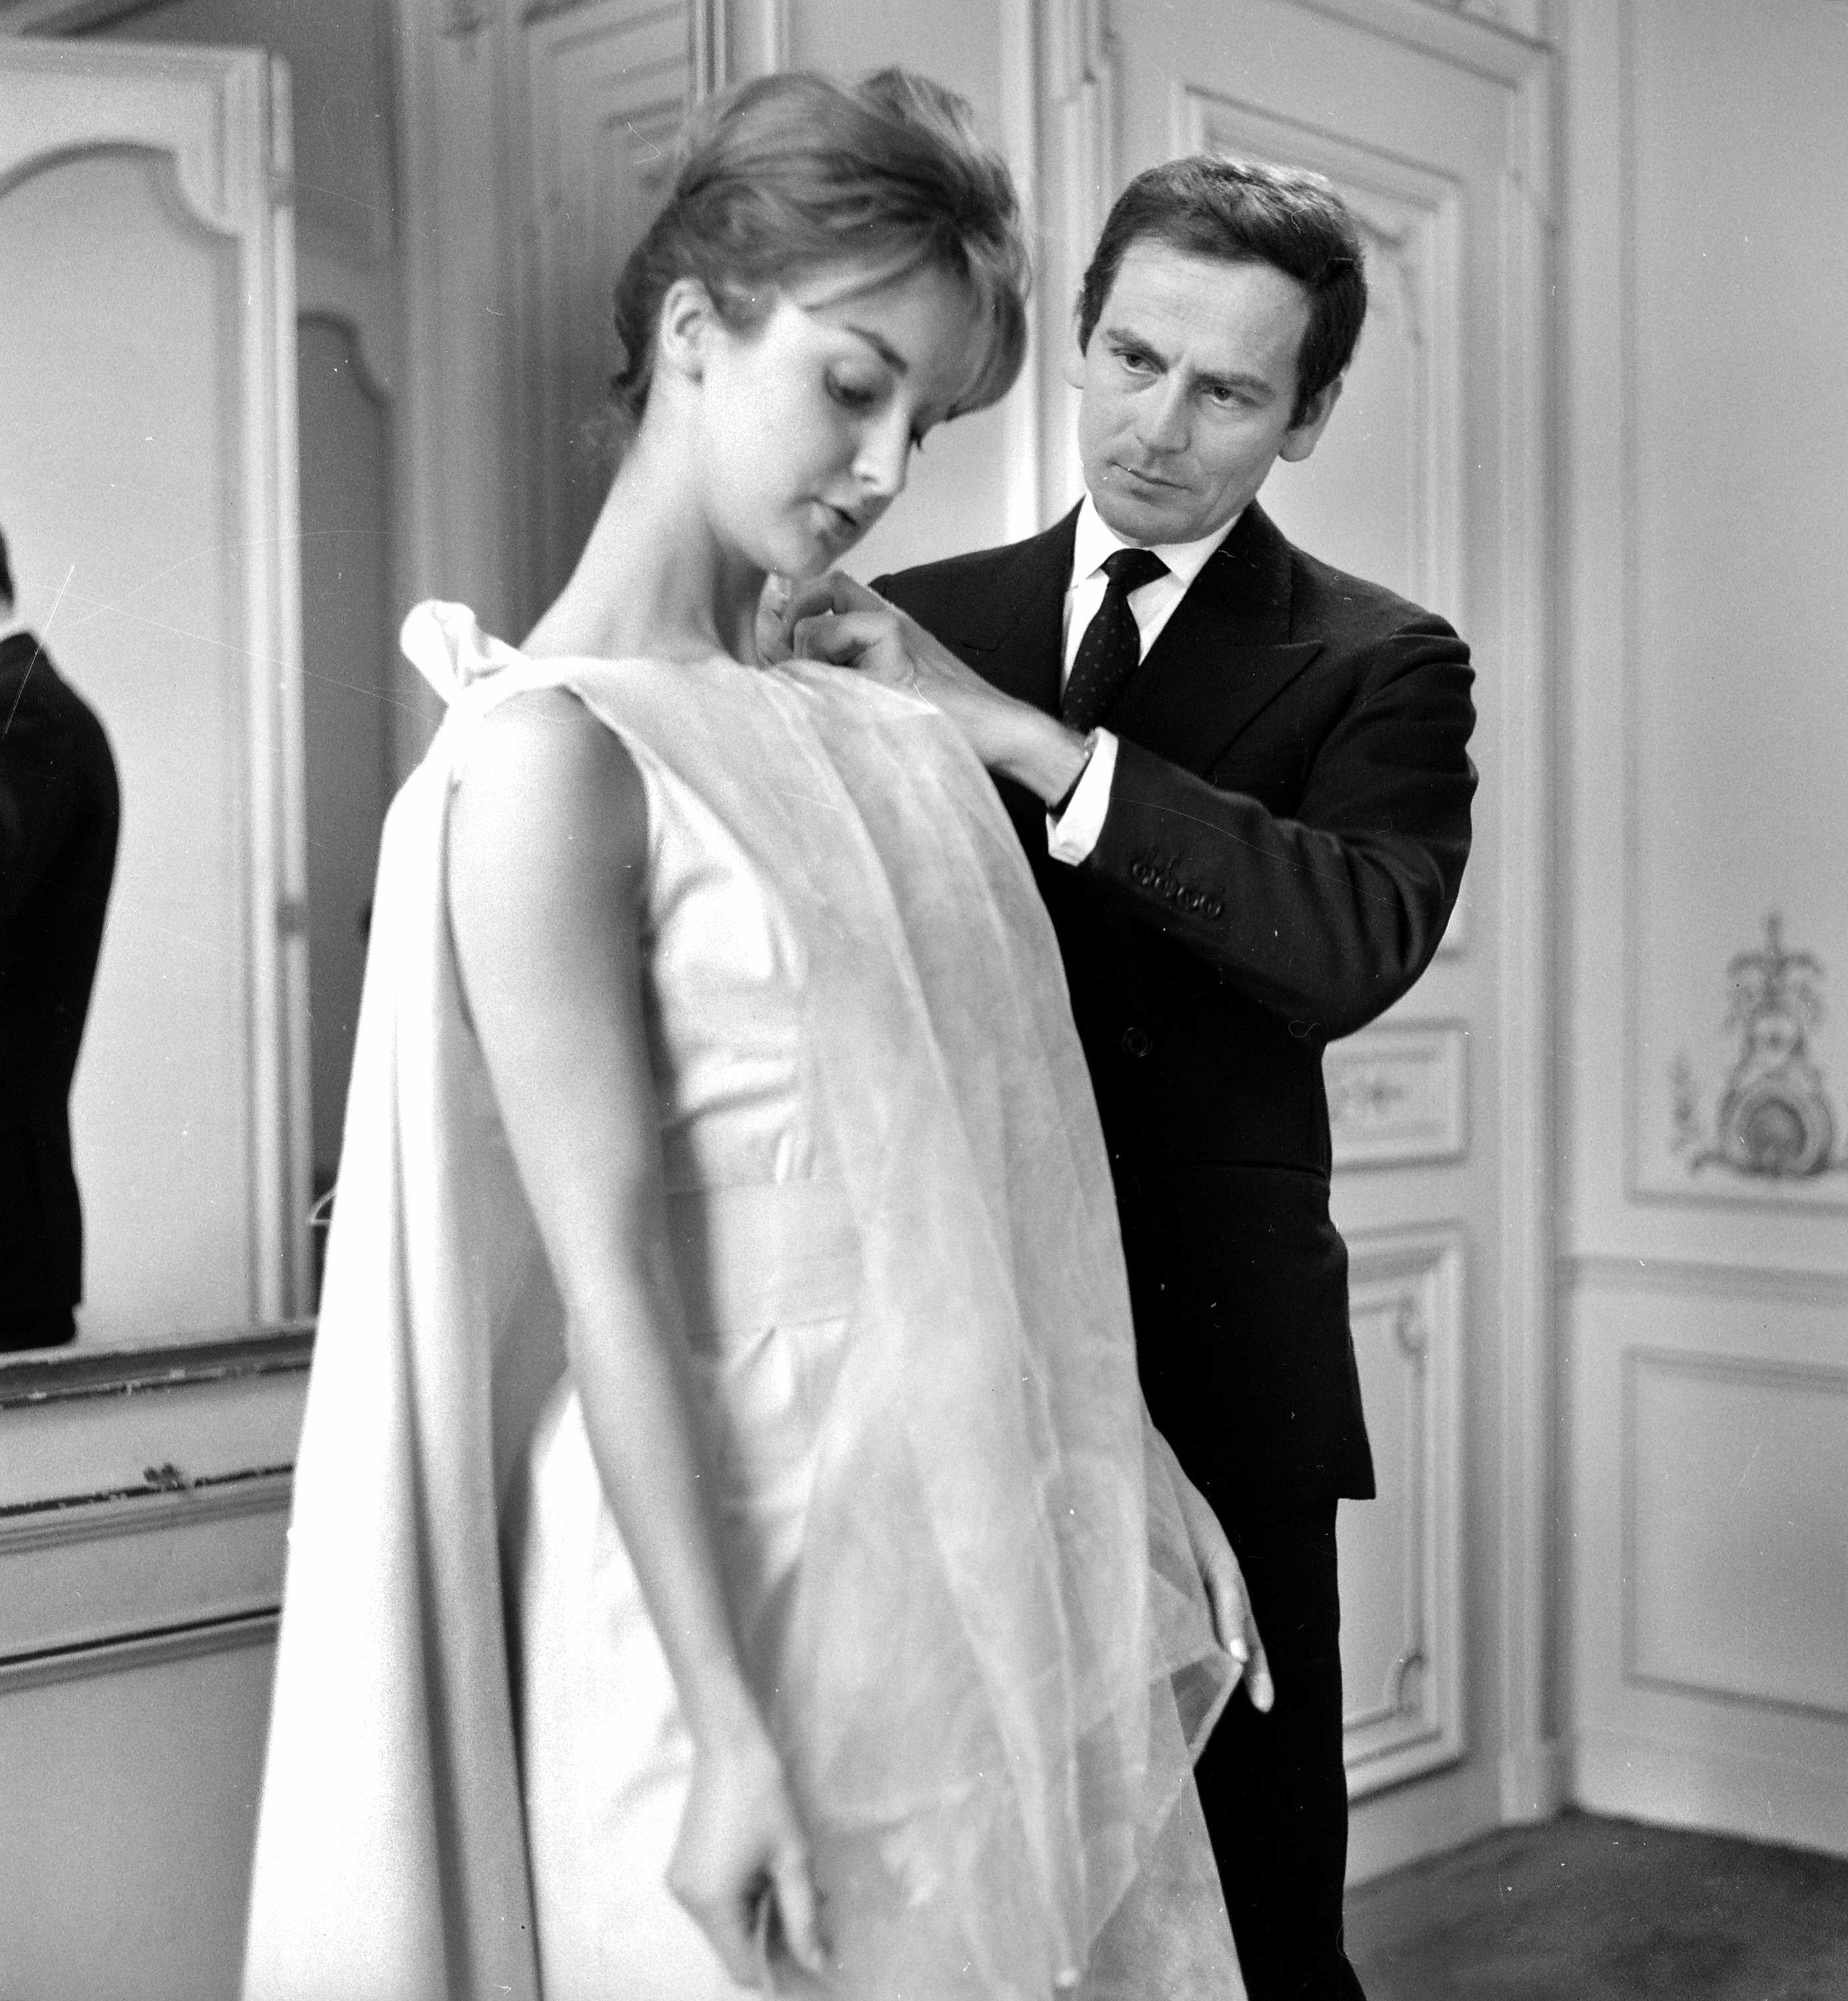 DW Culture - French designer Pierre Cardin has died at the